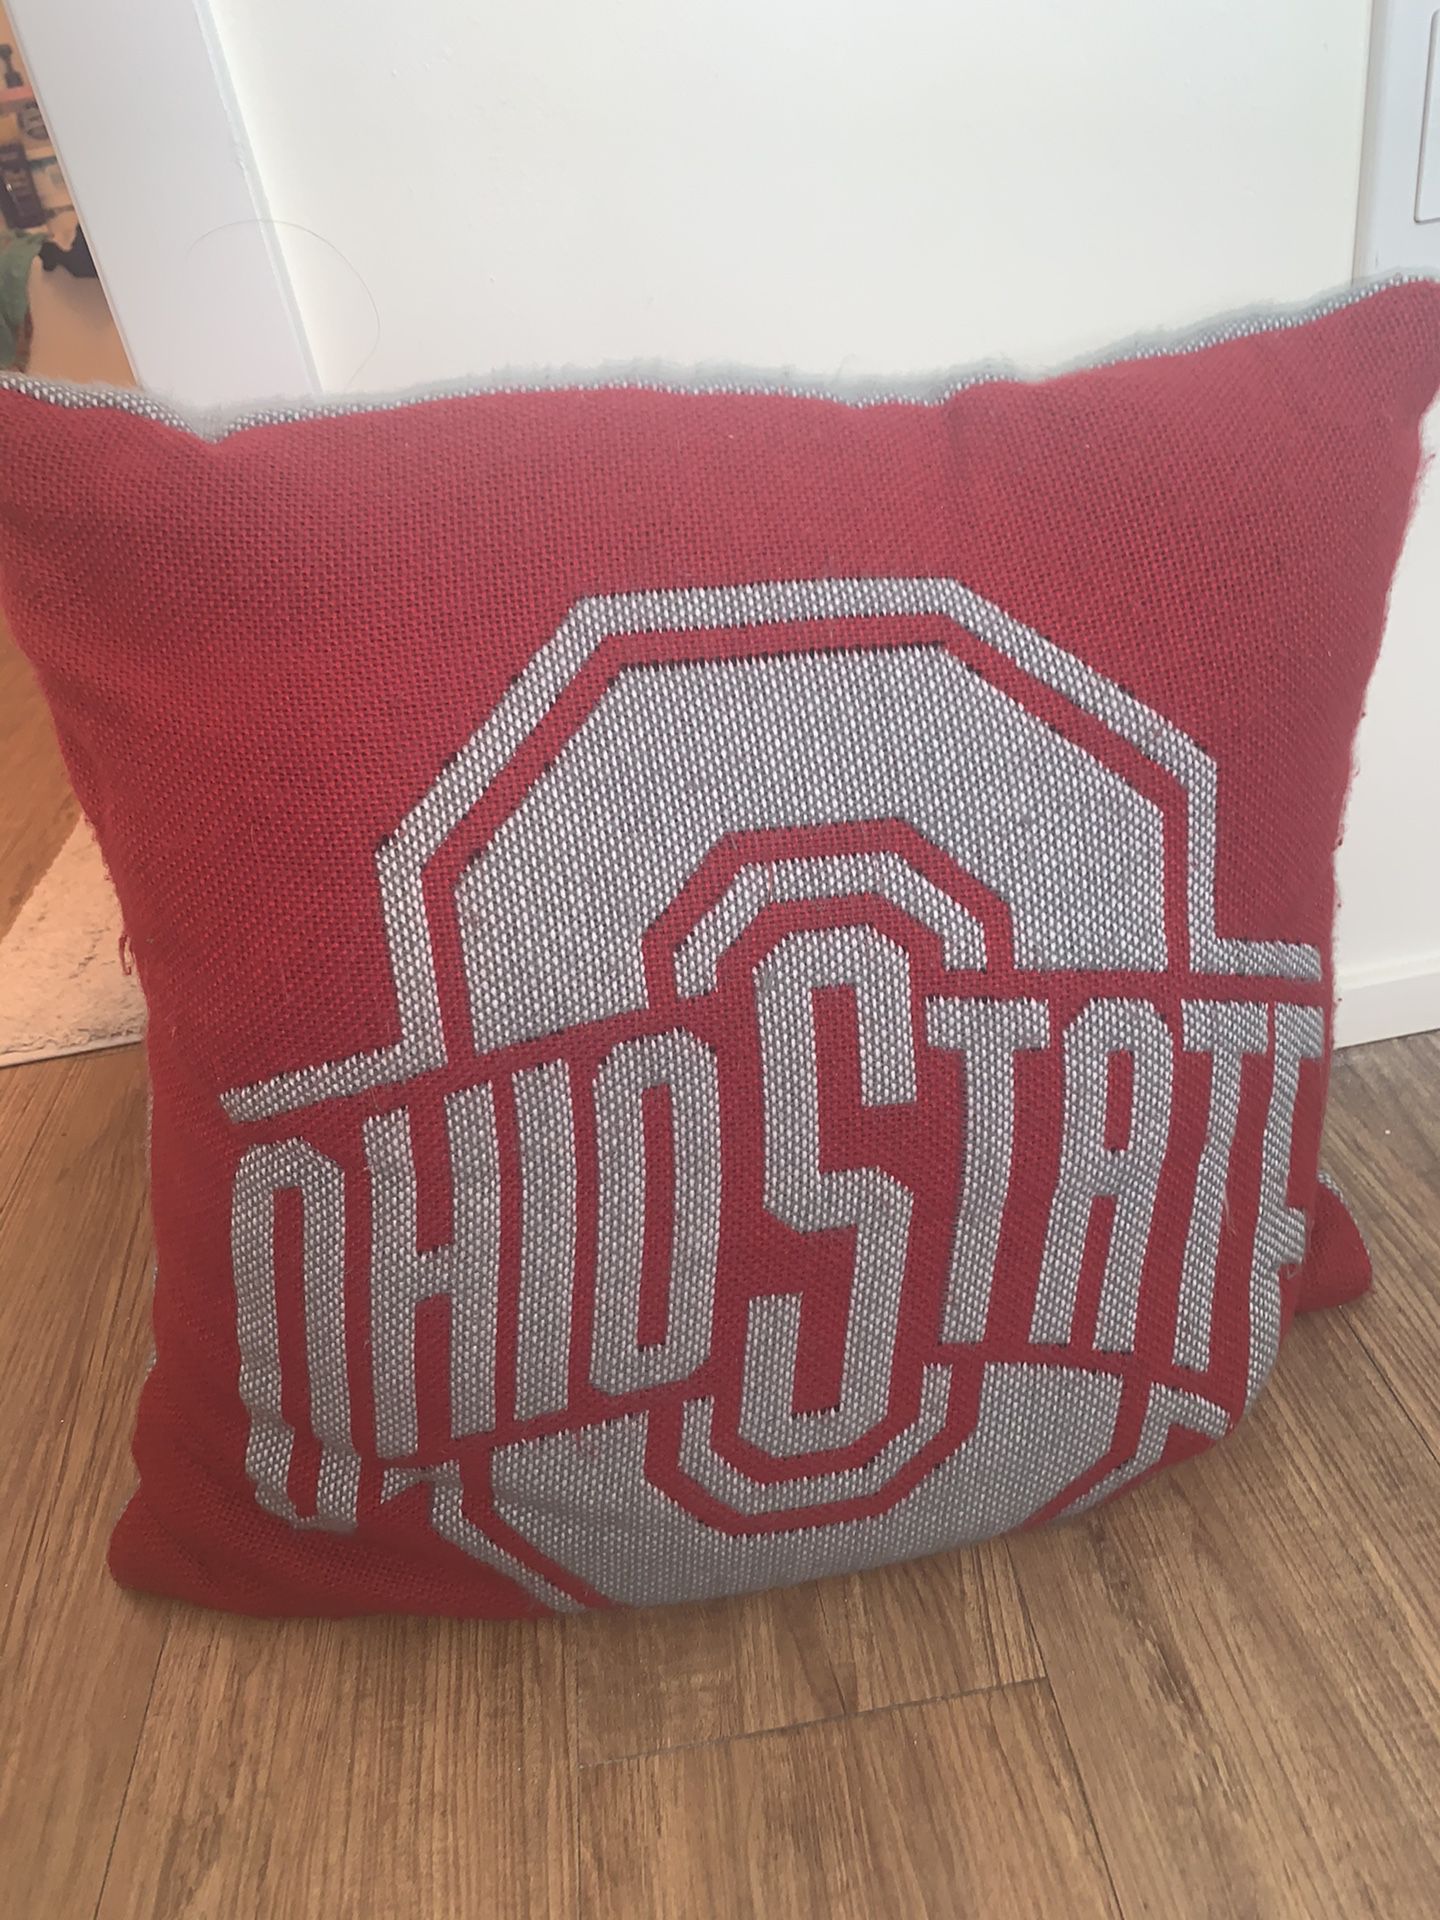 Ohio State Scarlet and Gray Pillow